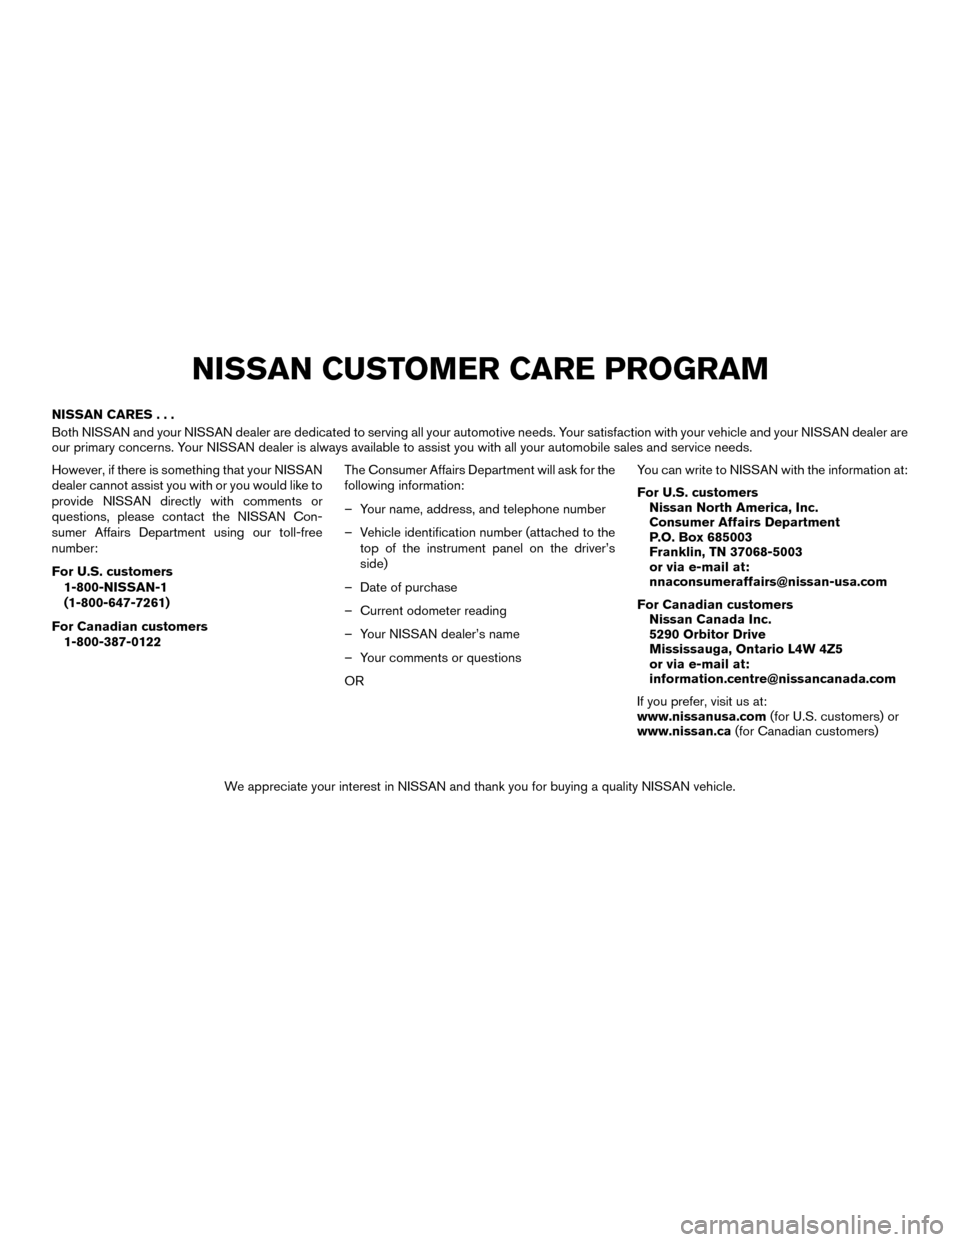 NISSAN MURANO HYBRID 2016 3.G Owners Manual NISSAN CARES...
Both NISSAN and your NISSAN dealer are dedicated to serving all your automotive needs. Your satisfaction with your vehicle and your NISSAN dealer are
our primary concerns. Your NISSAN 